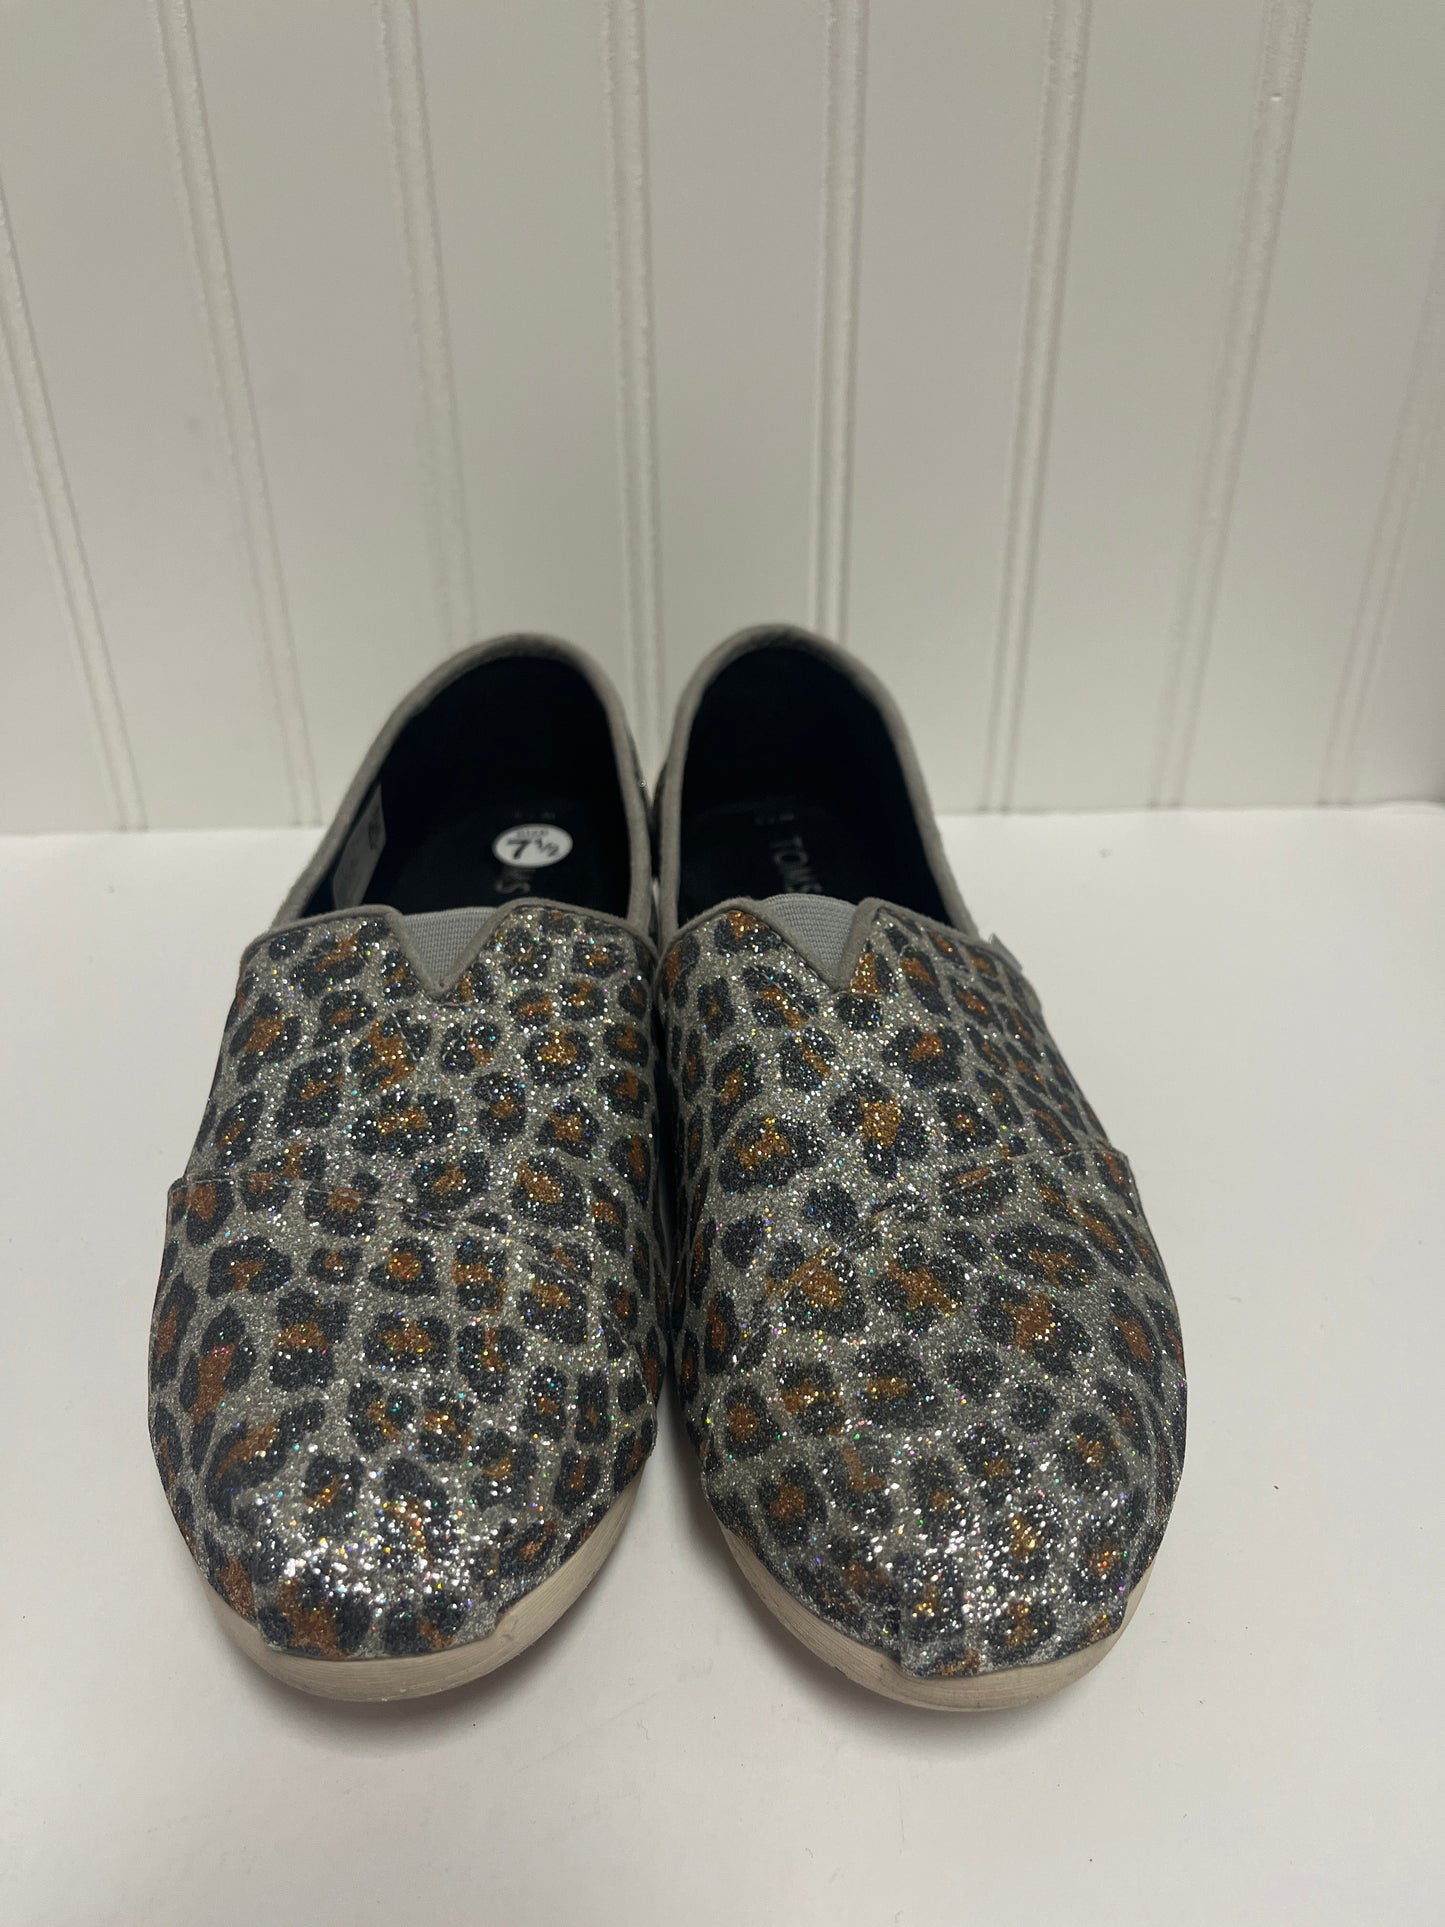 Shoes Flats By Toms  Size: 7.5